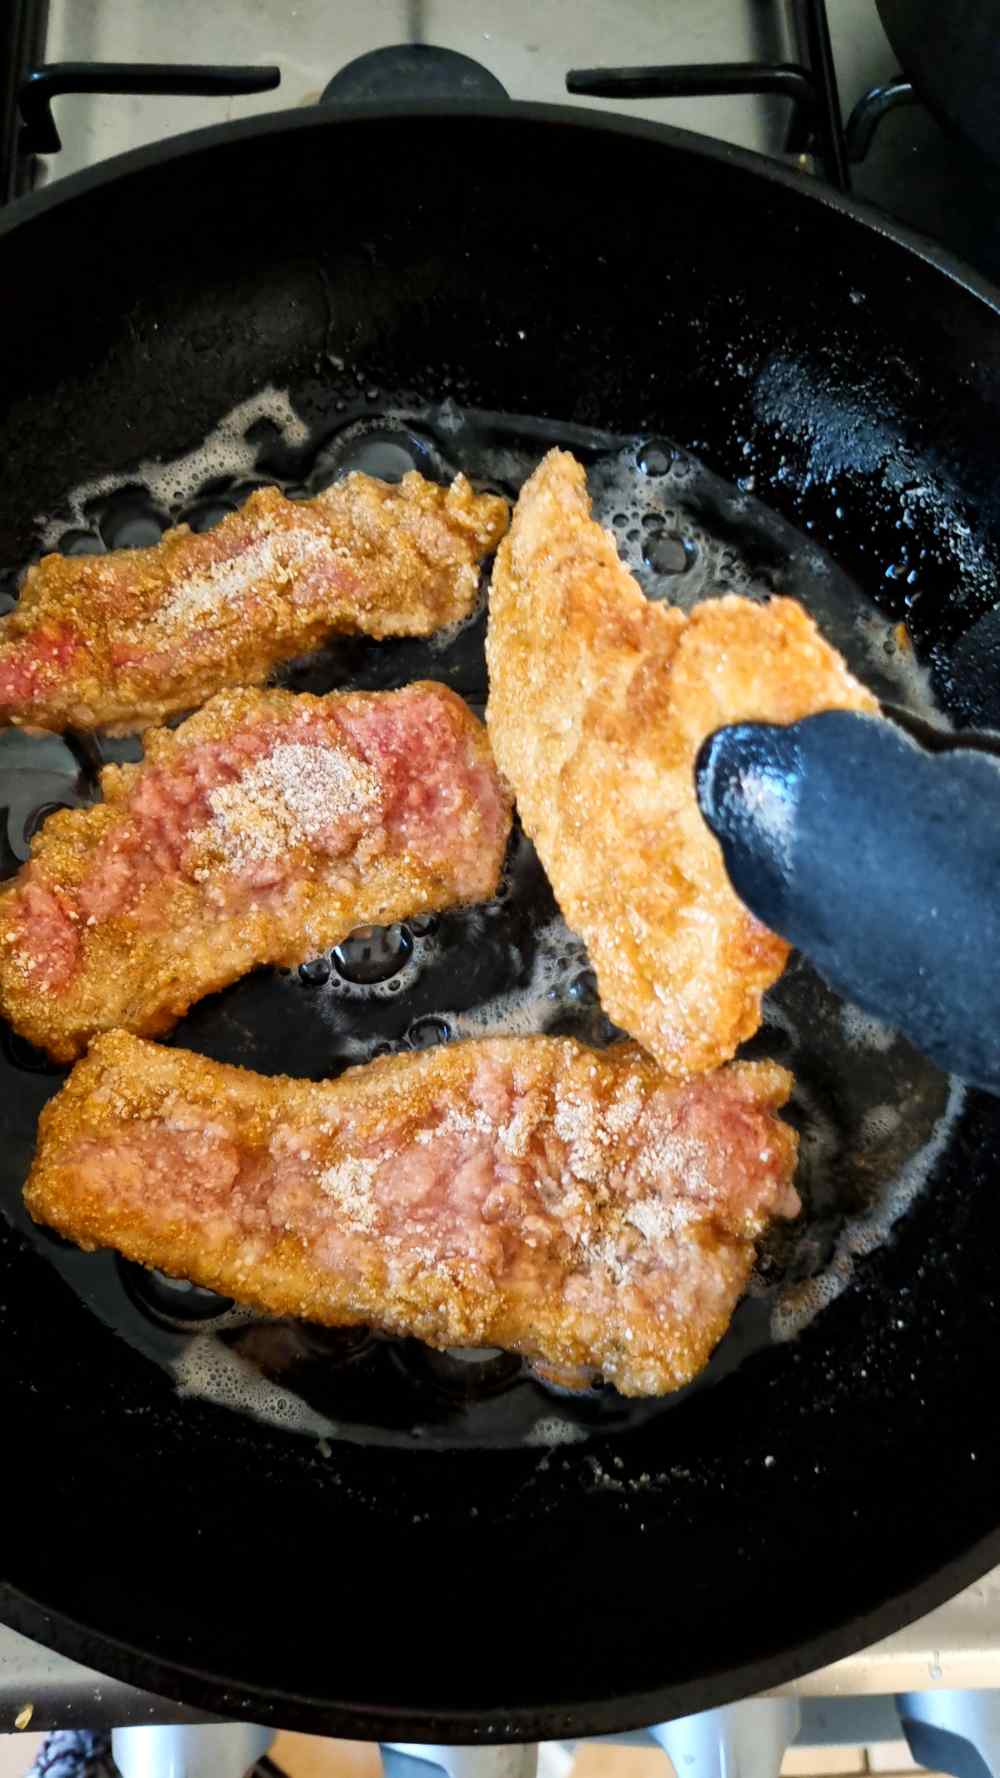 Flipping the pork cutlets in the frying pan.